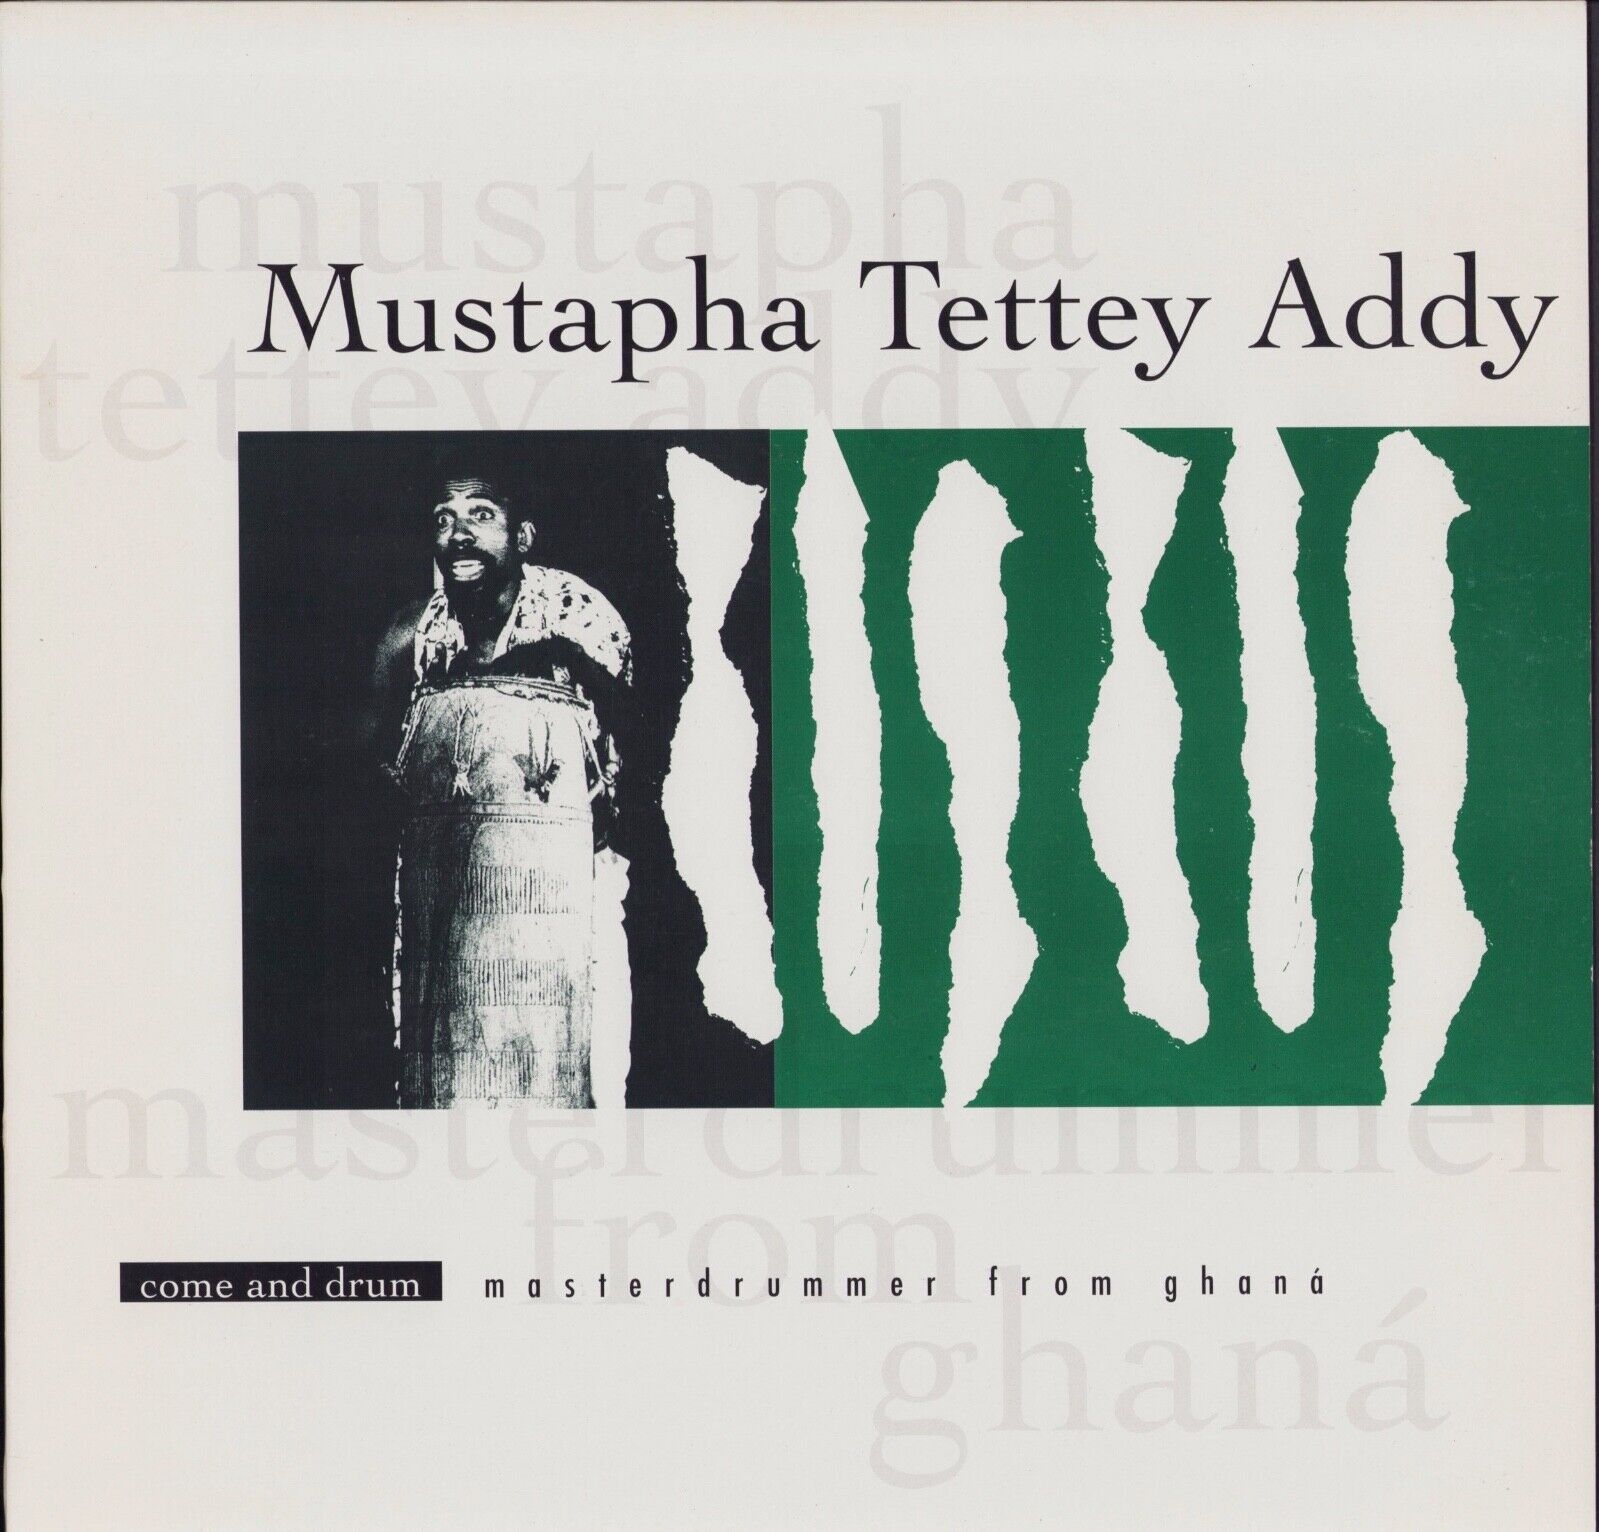 Mustapha Tettey Addy ‎- Come And Drum - Masterdrummer From Ghana Vinyl LP